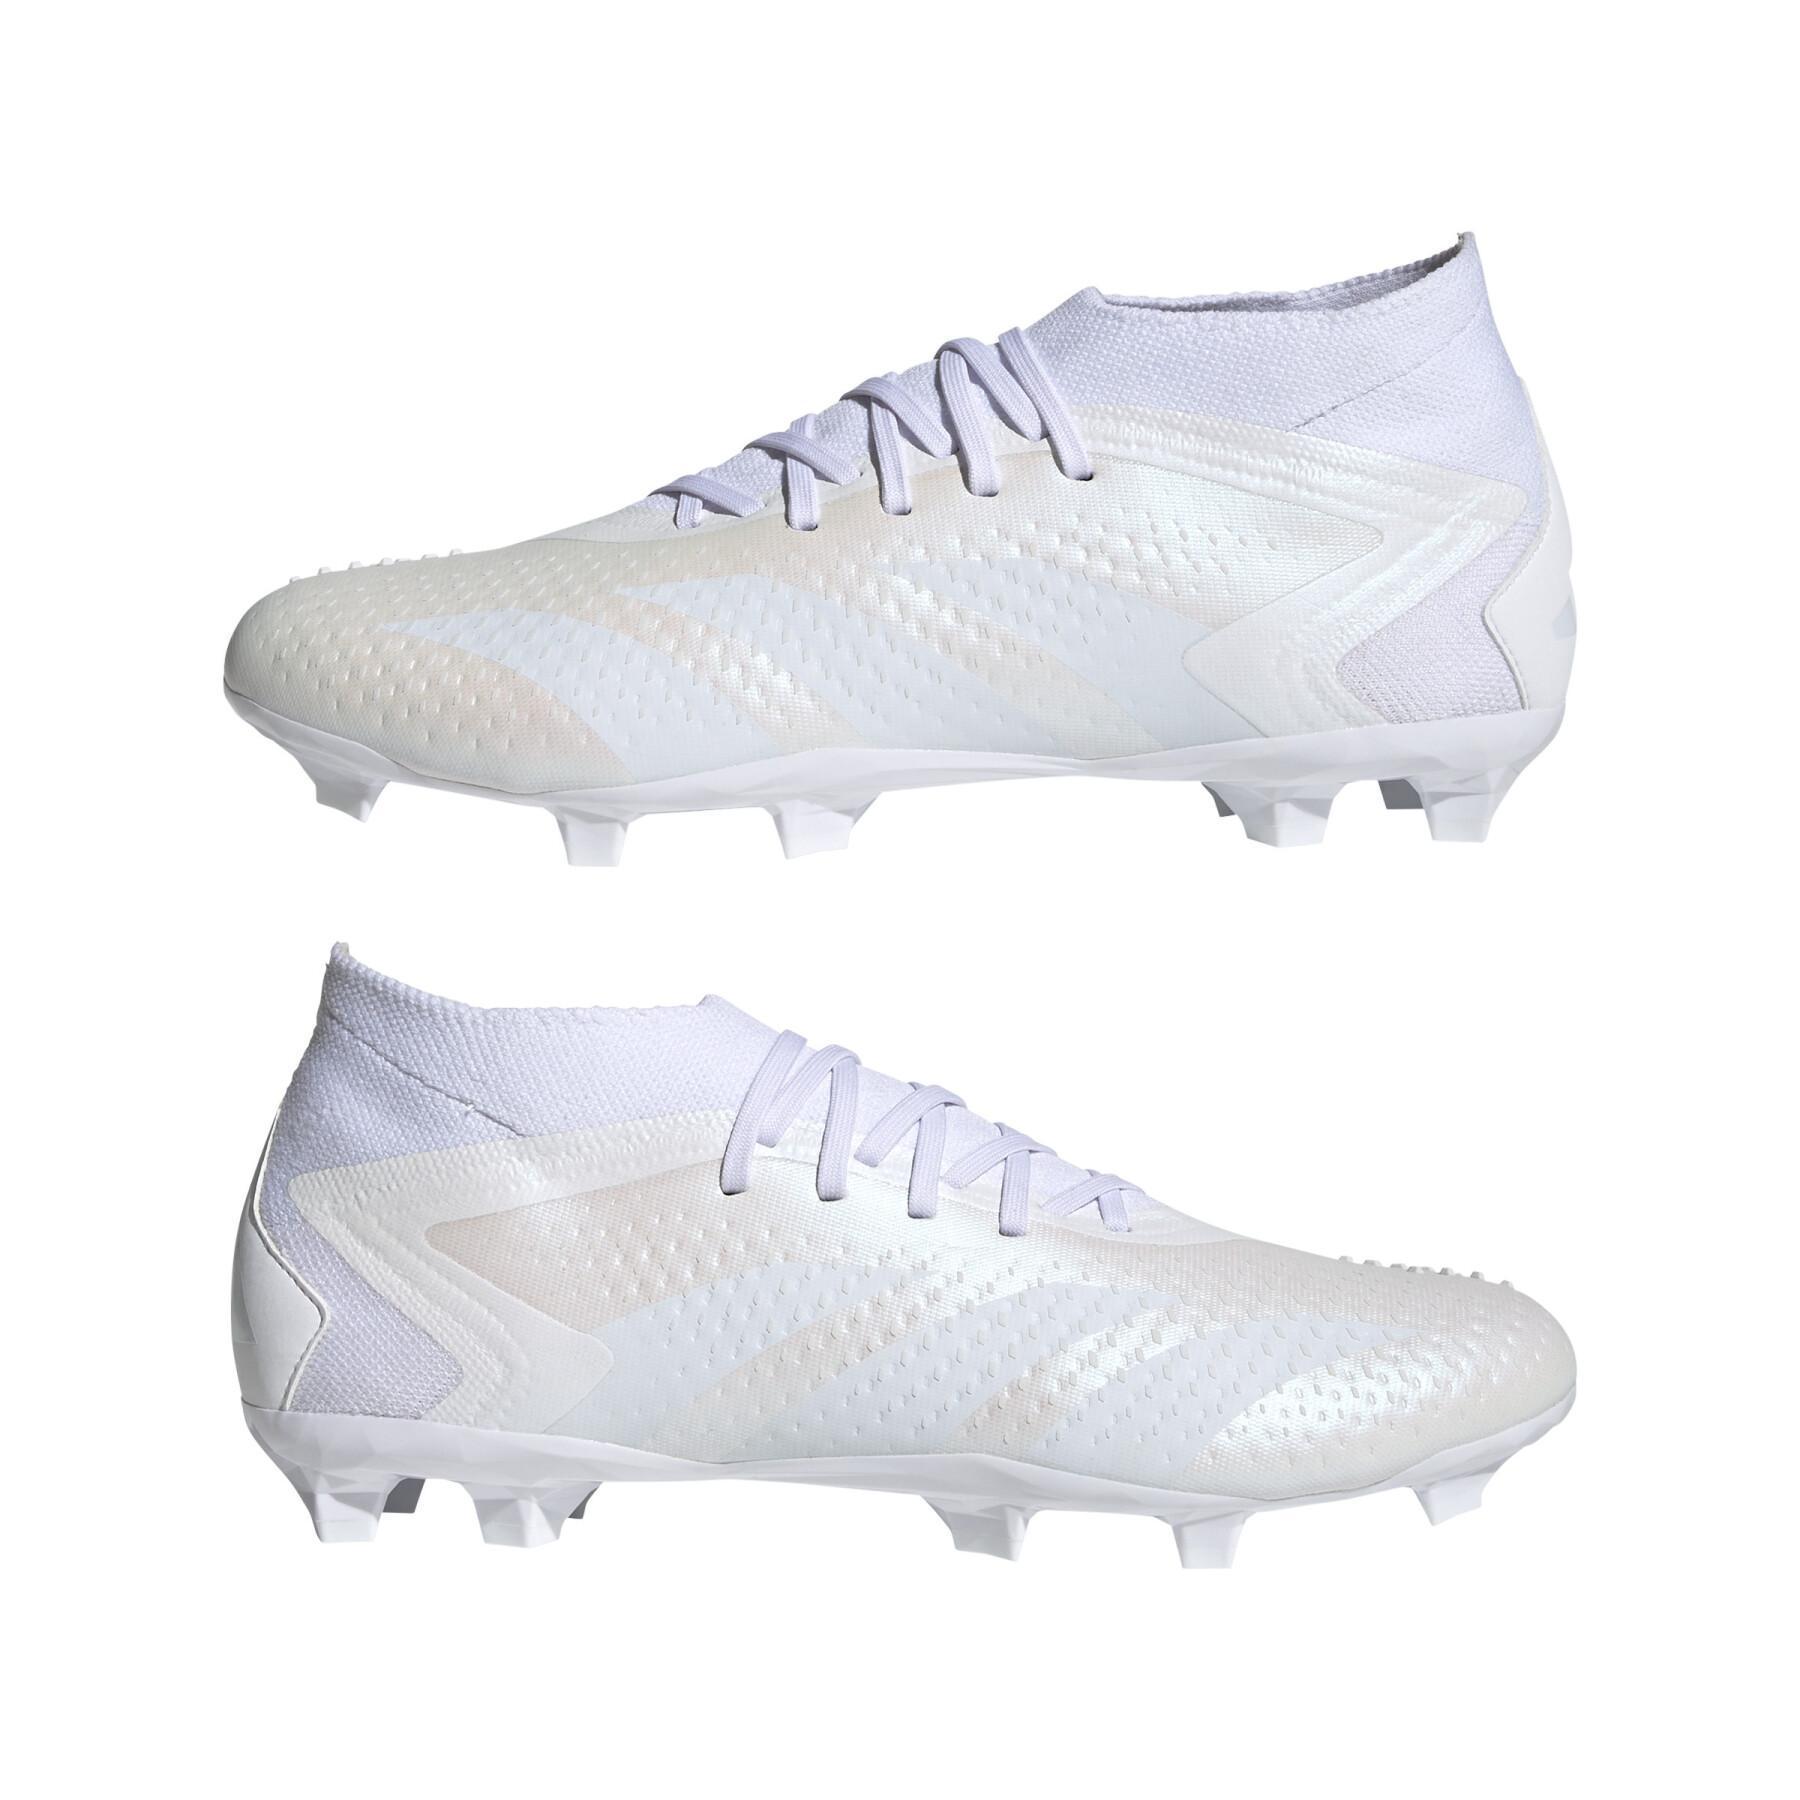 Soccer cleats adidas Predator Accuracy.2 - Pearlized Pack